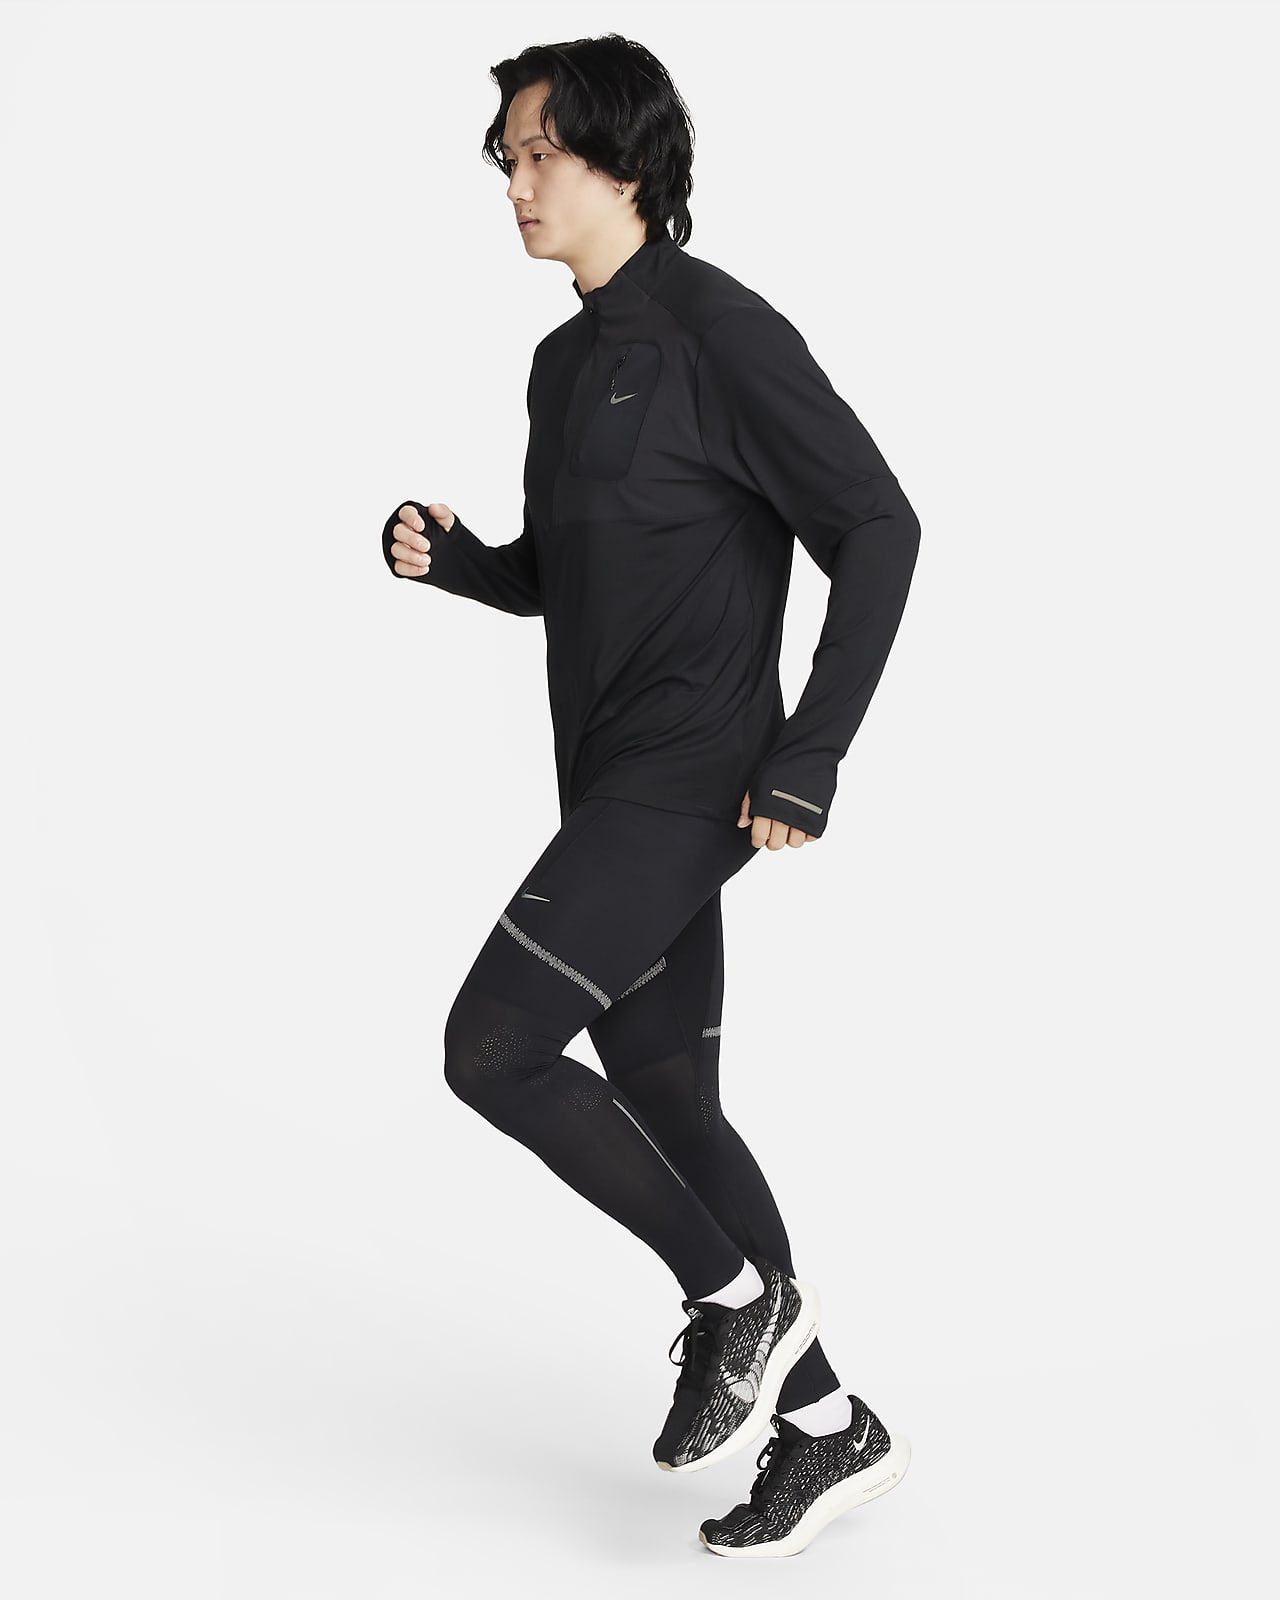 https://static.nike.com/a/images/t_PDP_1280_v1/f_auto,q_auto:eco/826ea8df-7baa-4254-8ce9-4a64d11d81d4/running-division-dri-fit-adv-running-tights-38CXV1.png